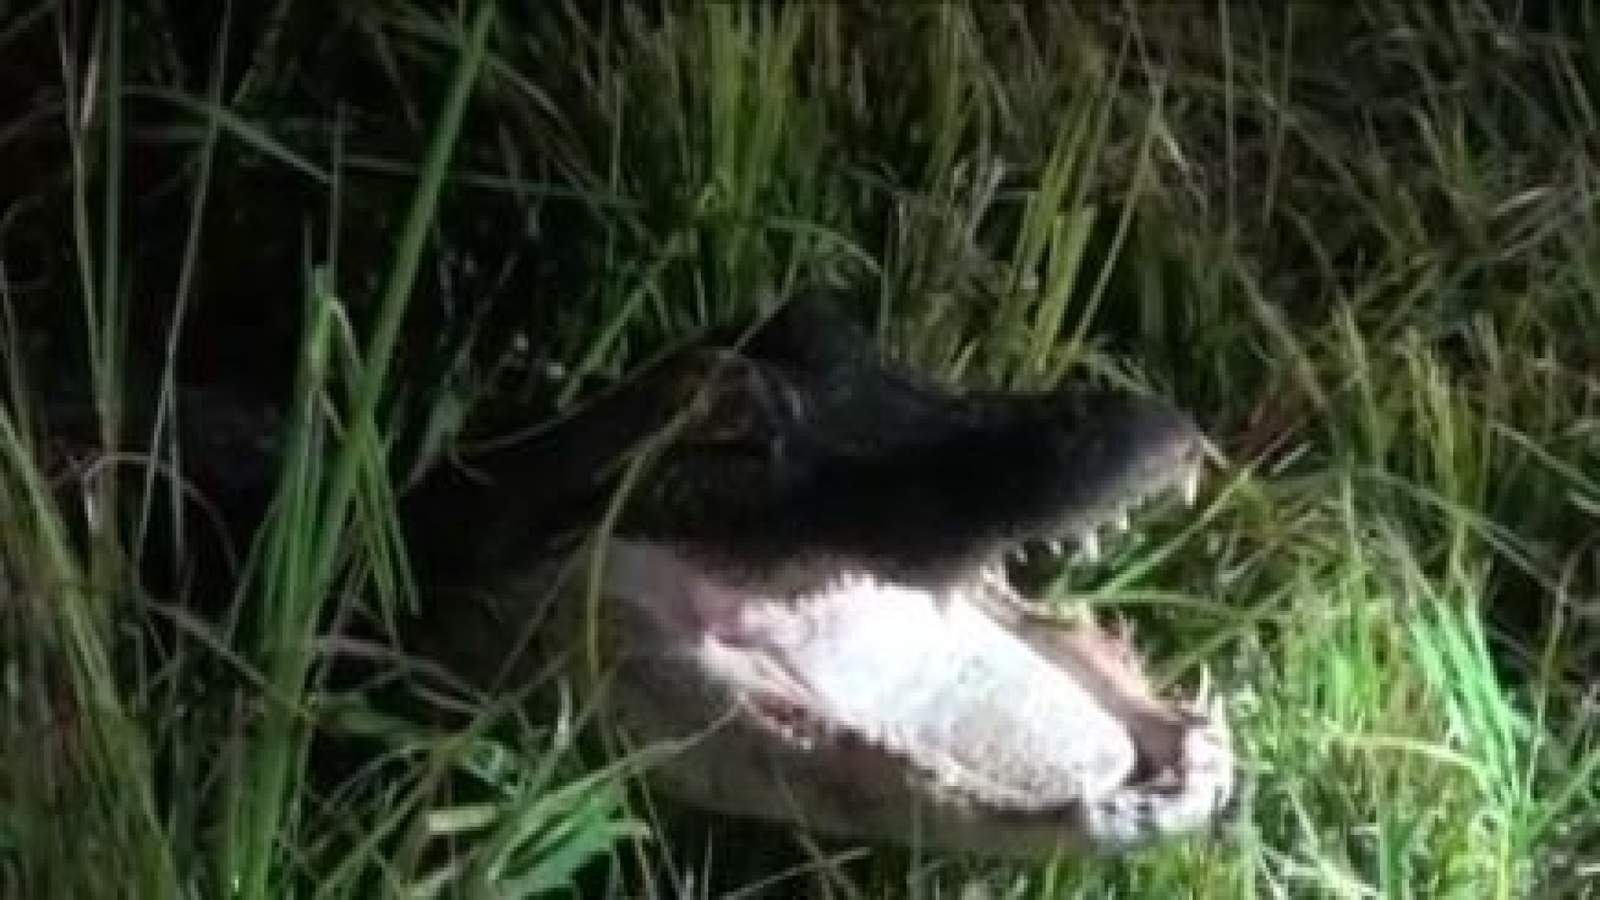 Florida woman discovers alligators fighting by her home